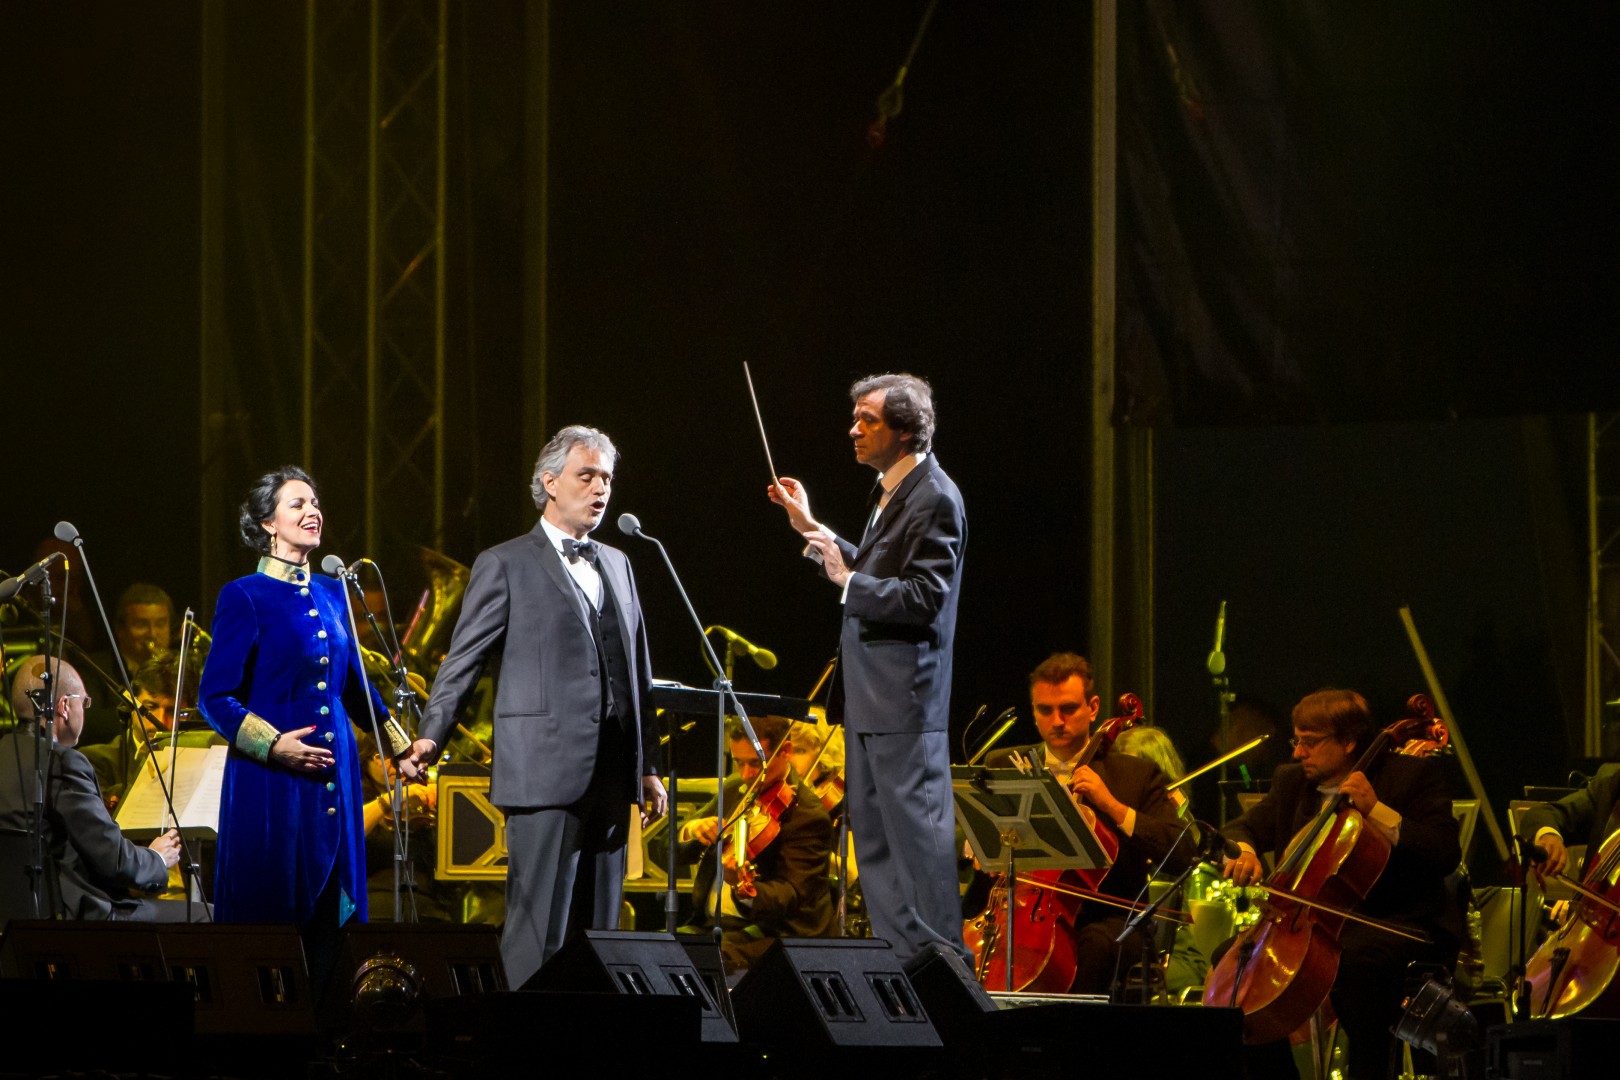 Andrea Bocelli & Angela Gheorghiu at Romexpo in Bucharest on May 25, 2013 (af9eae9772)